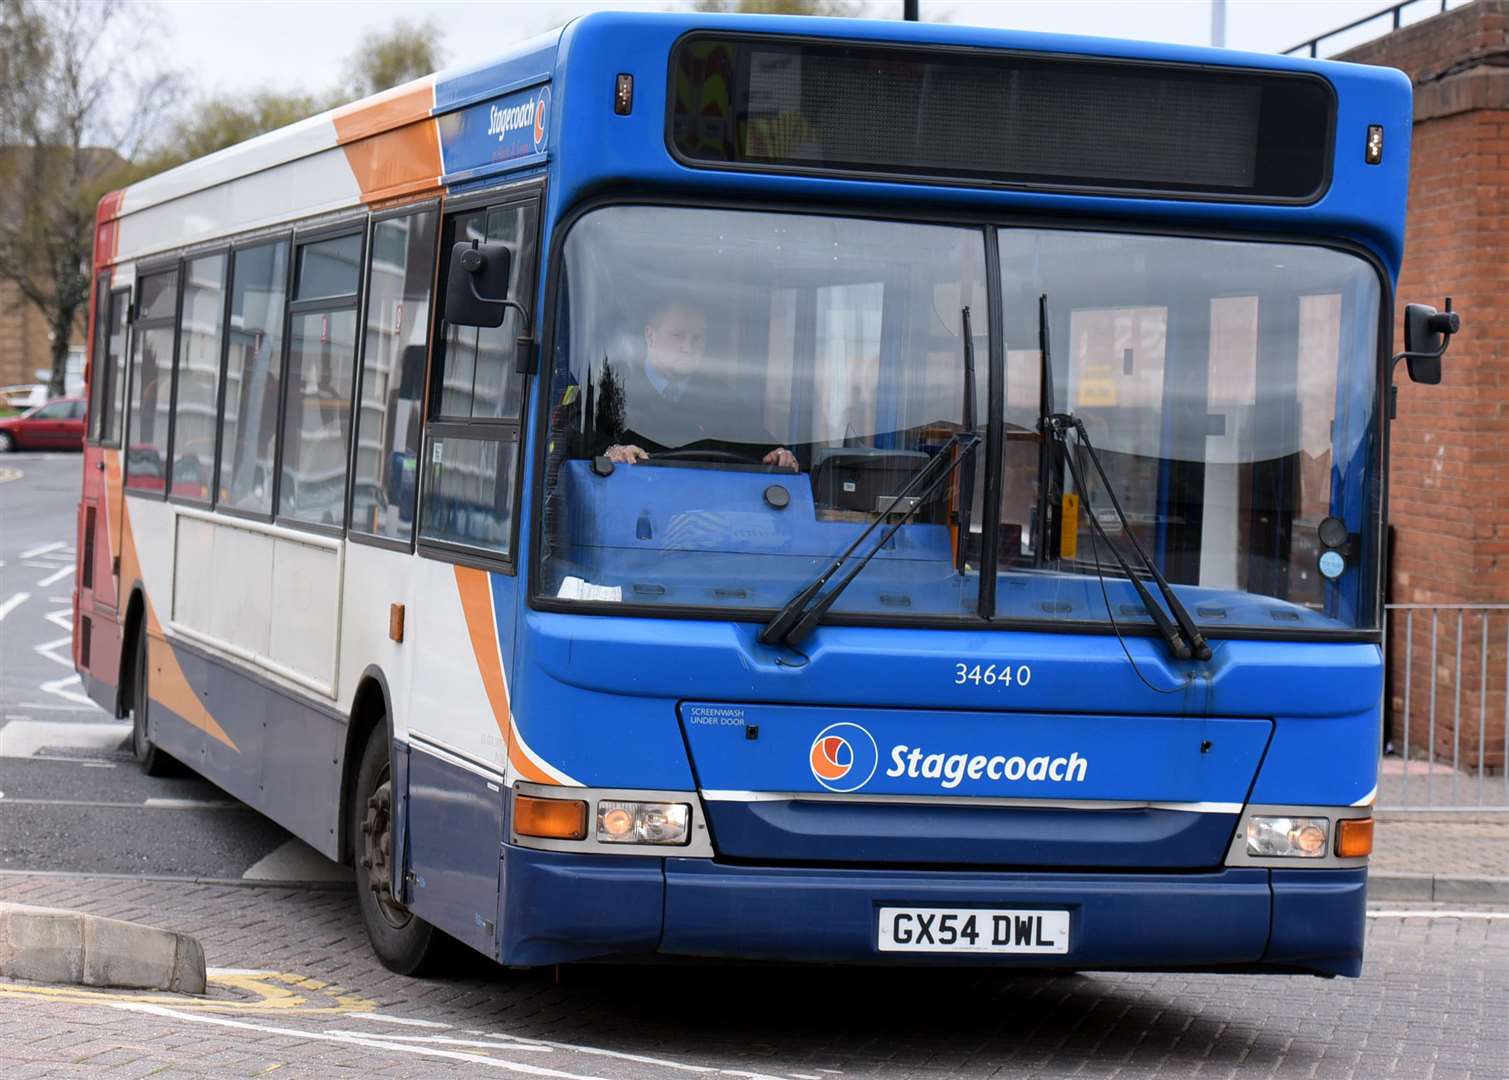 Stagecoach is going to look into the problems